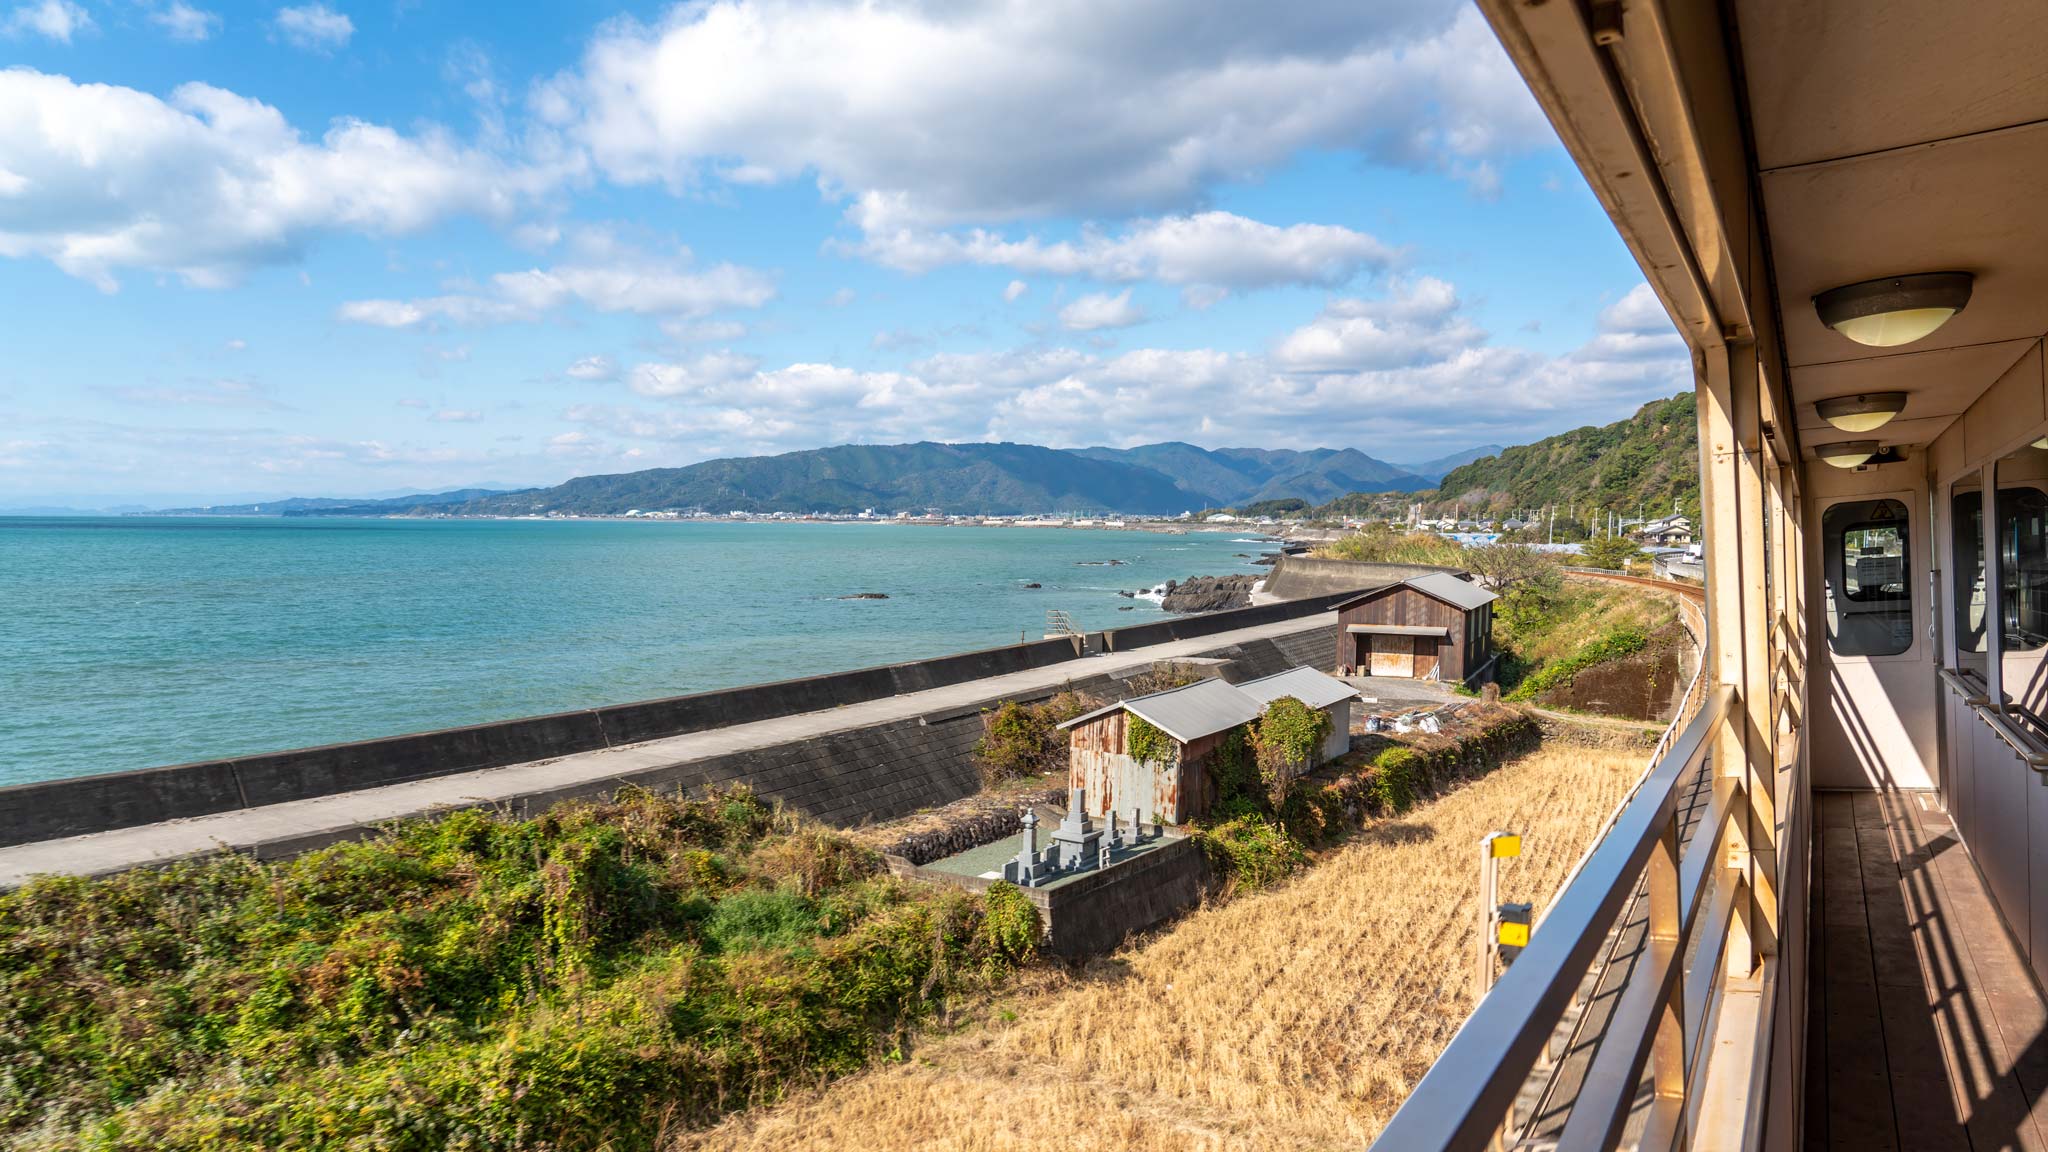 An open sided train in Kochi, Japan, looks out to the ocean